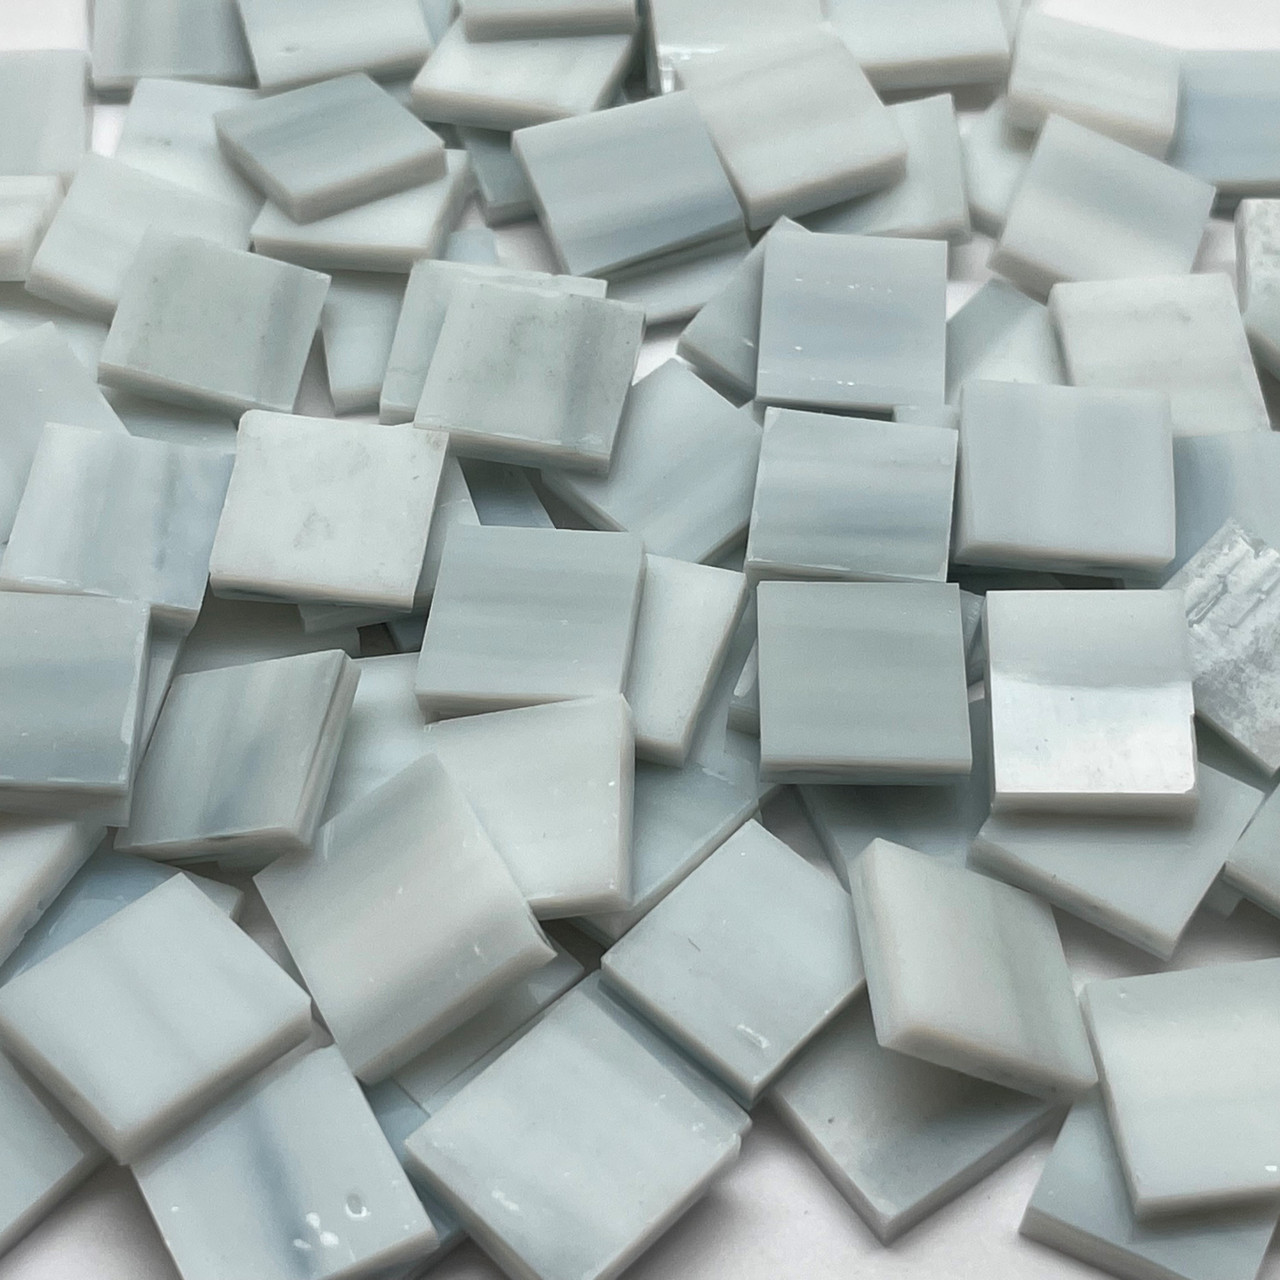 HALF PRICE:  Light Gray & White Opal Stained Glass Mosaic Tiles